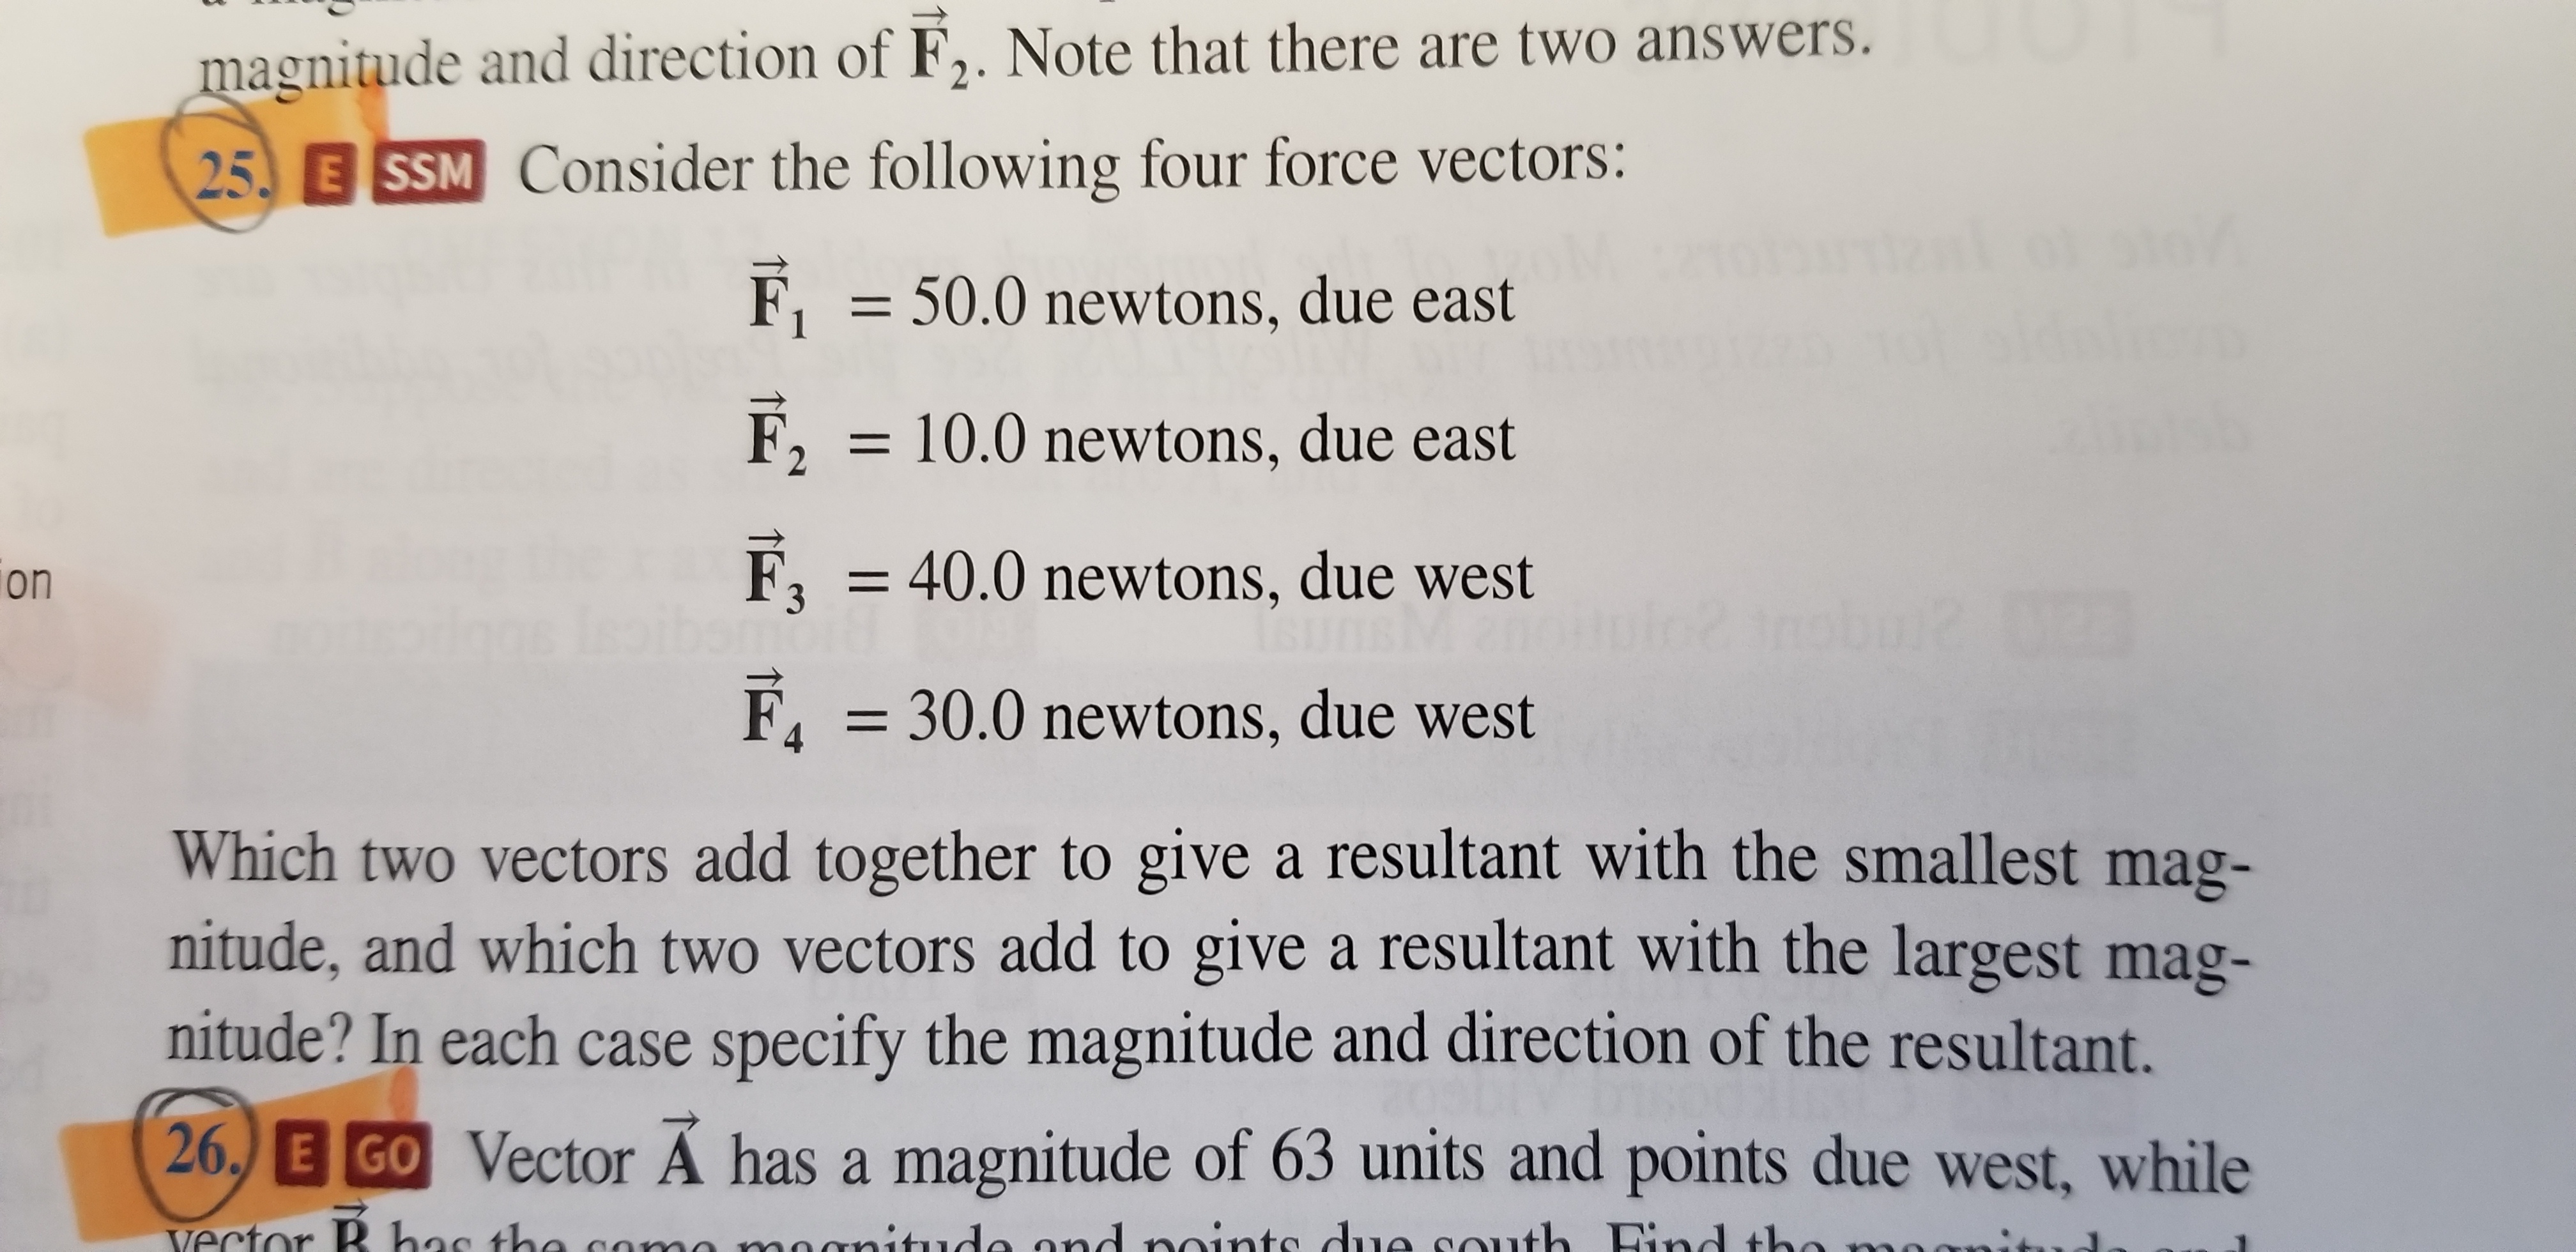 magnitude and direction of F2. Note that there are two answers.
25 E SSM Consider the following four force vectors:
F150.0 newtons, due east
F210.0 newtons, due east
F3 40.0 newtons, due west
F, 30.0 newtons, due west
on
Which two vectors add together to give a resultant with the smallest mag-
nitude, and which two vectors add to give a resultant with the largest mag-
nitude? In each case specify the magnitude and direction of the resultant.
26, E GO Vector Ä has a magnitude of 63 units and points due west, while
